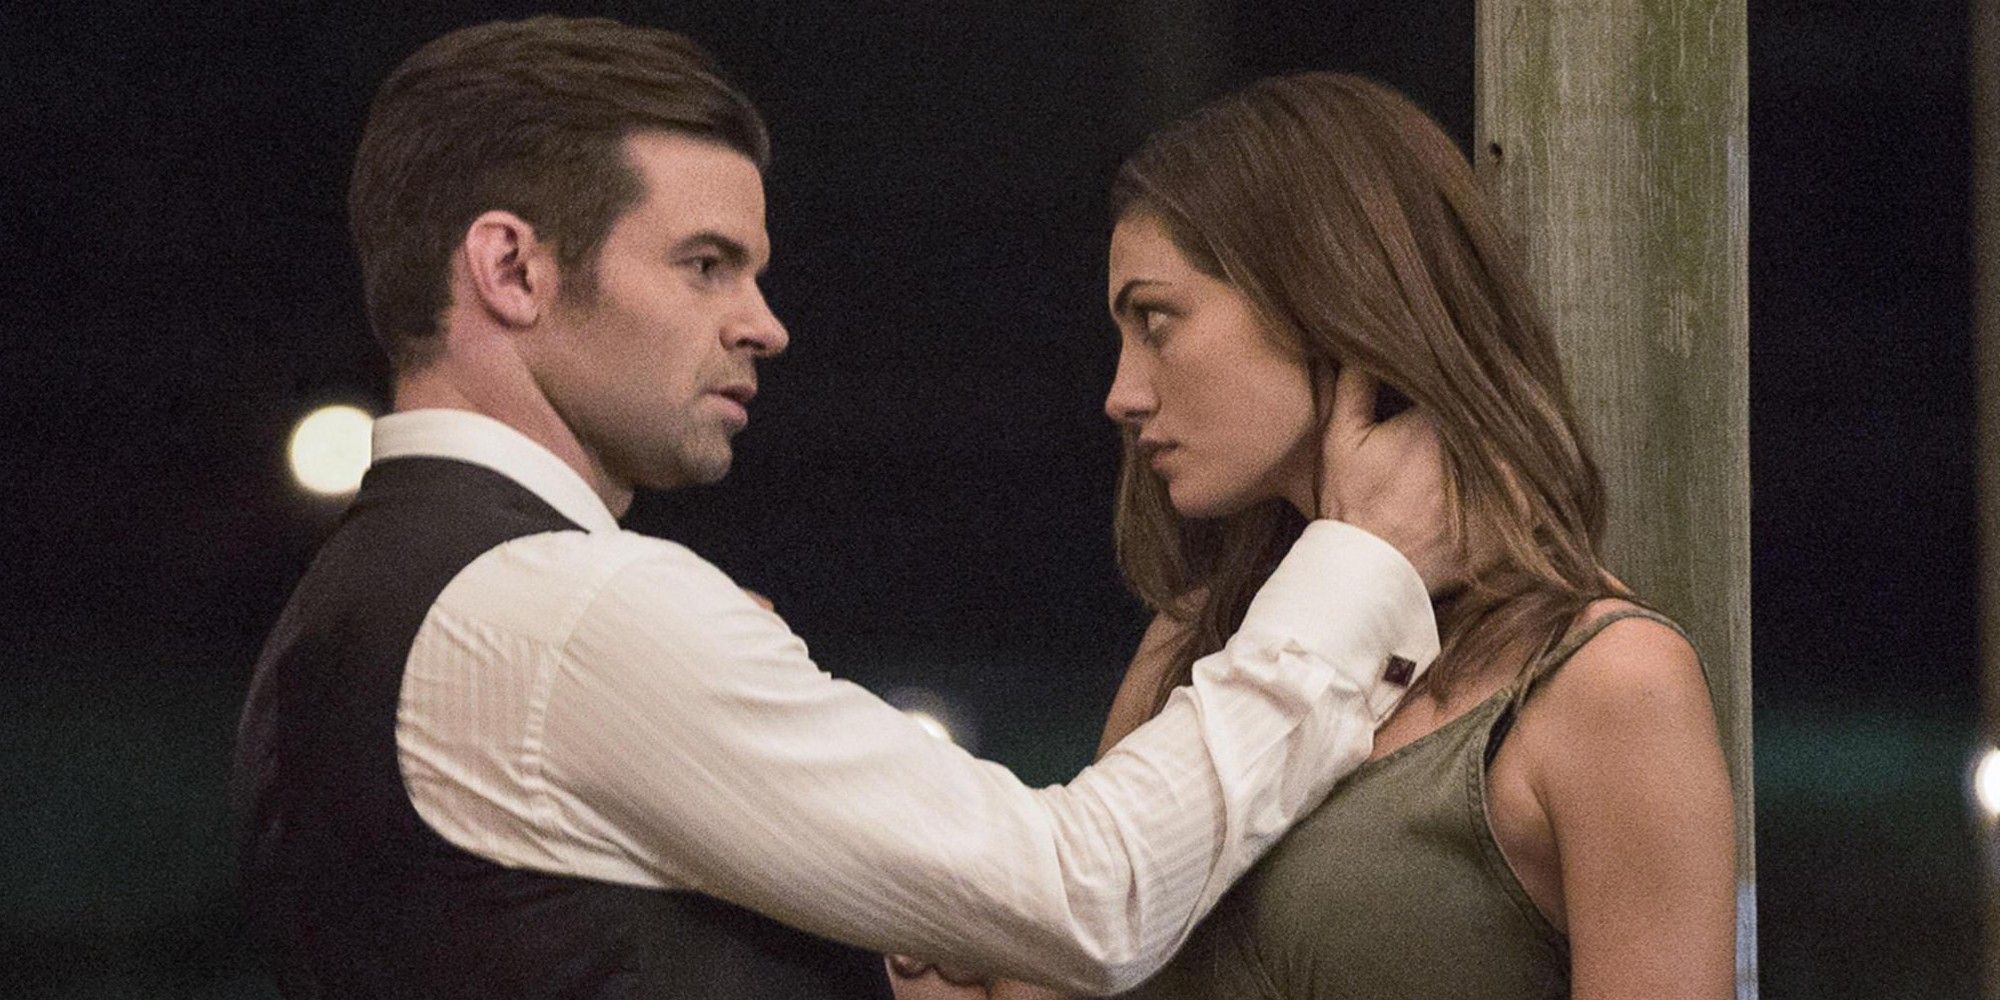 Elijah and Hayley looking at each other in The Originals.